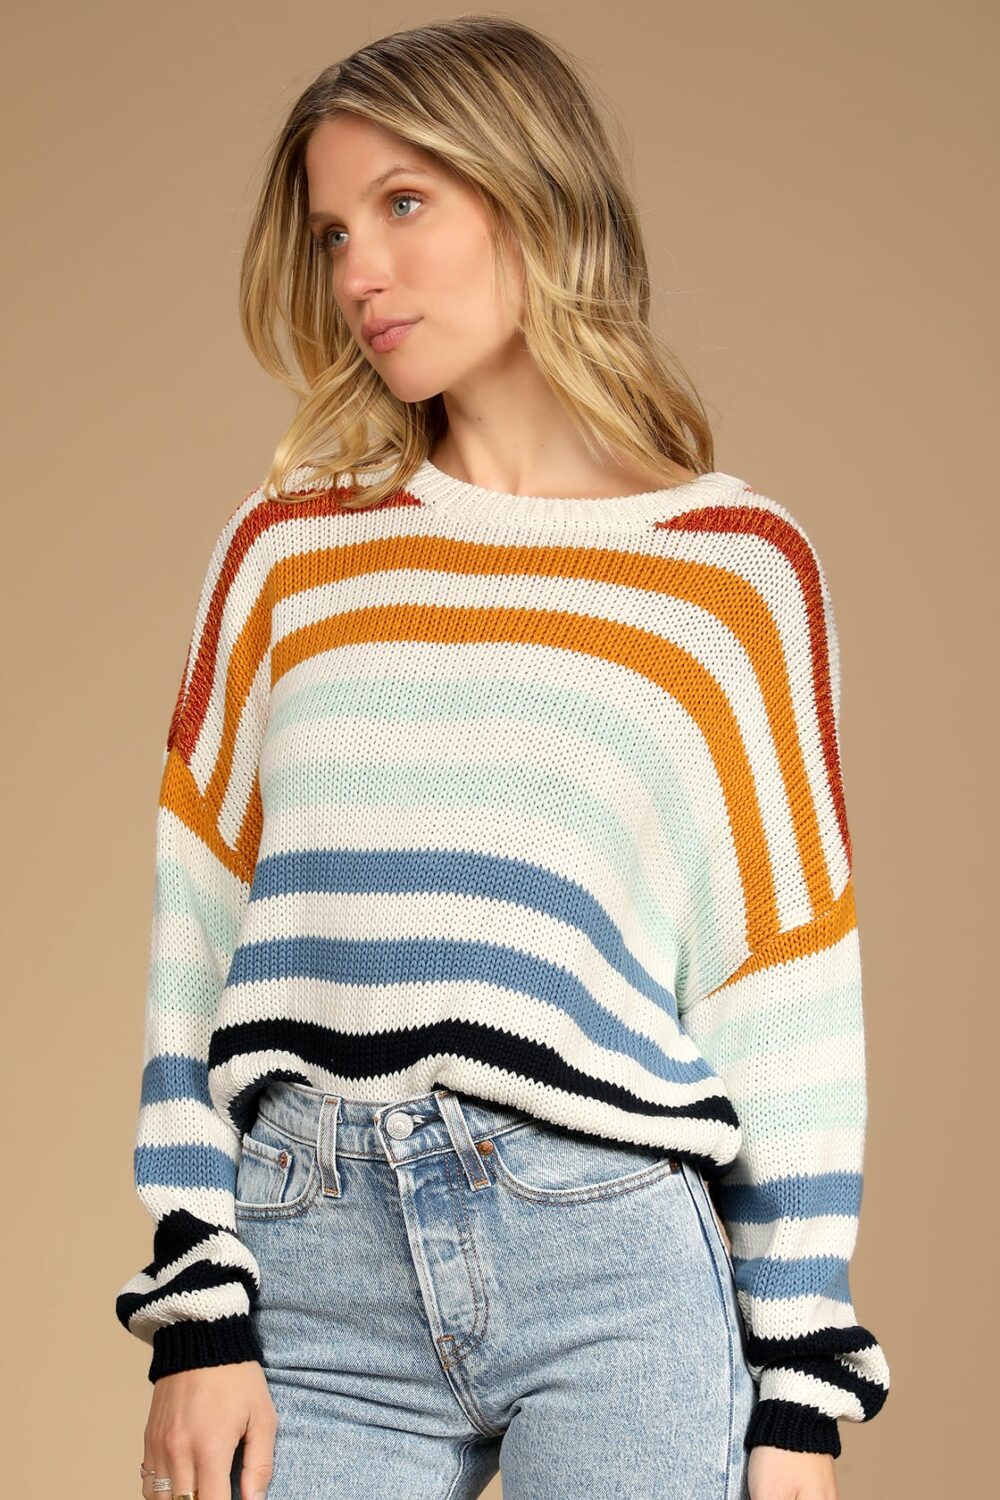 This season youll live in this Charli Sweater. It has a chic rounded neckline a stripe pattern that varies in hue from rust red to mustard yellow to light blue to cobalt blue to navy blue.